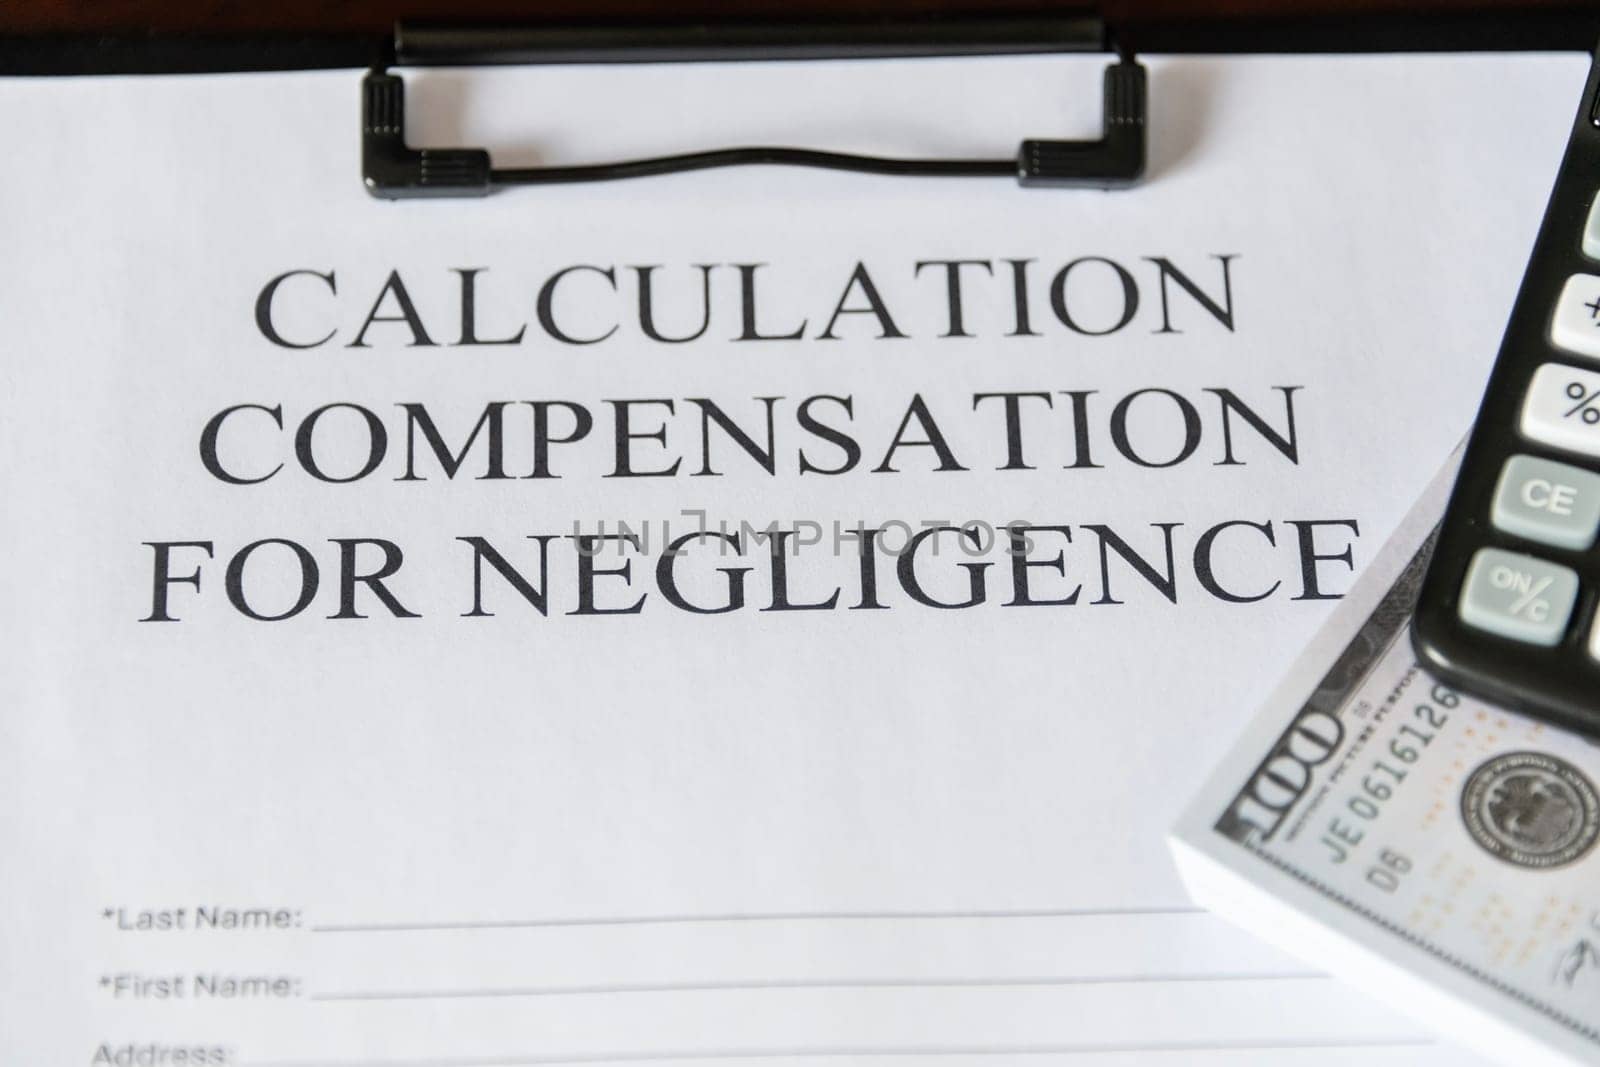 Legal document titled 'Calculation Compensation for Negligence' with a gavel and calculator, symbolizing judicial proceedings